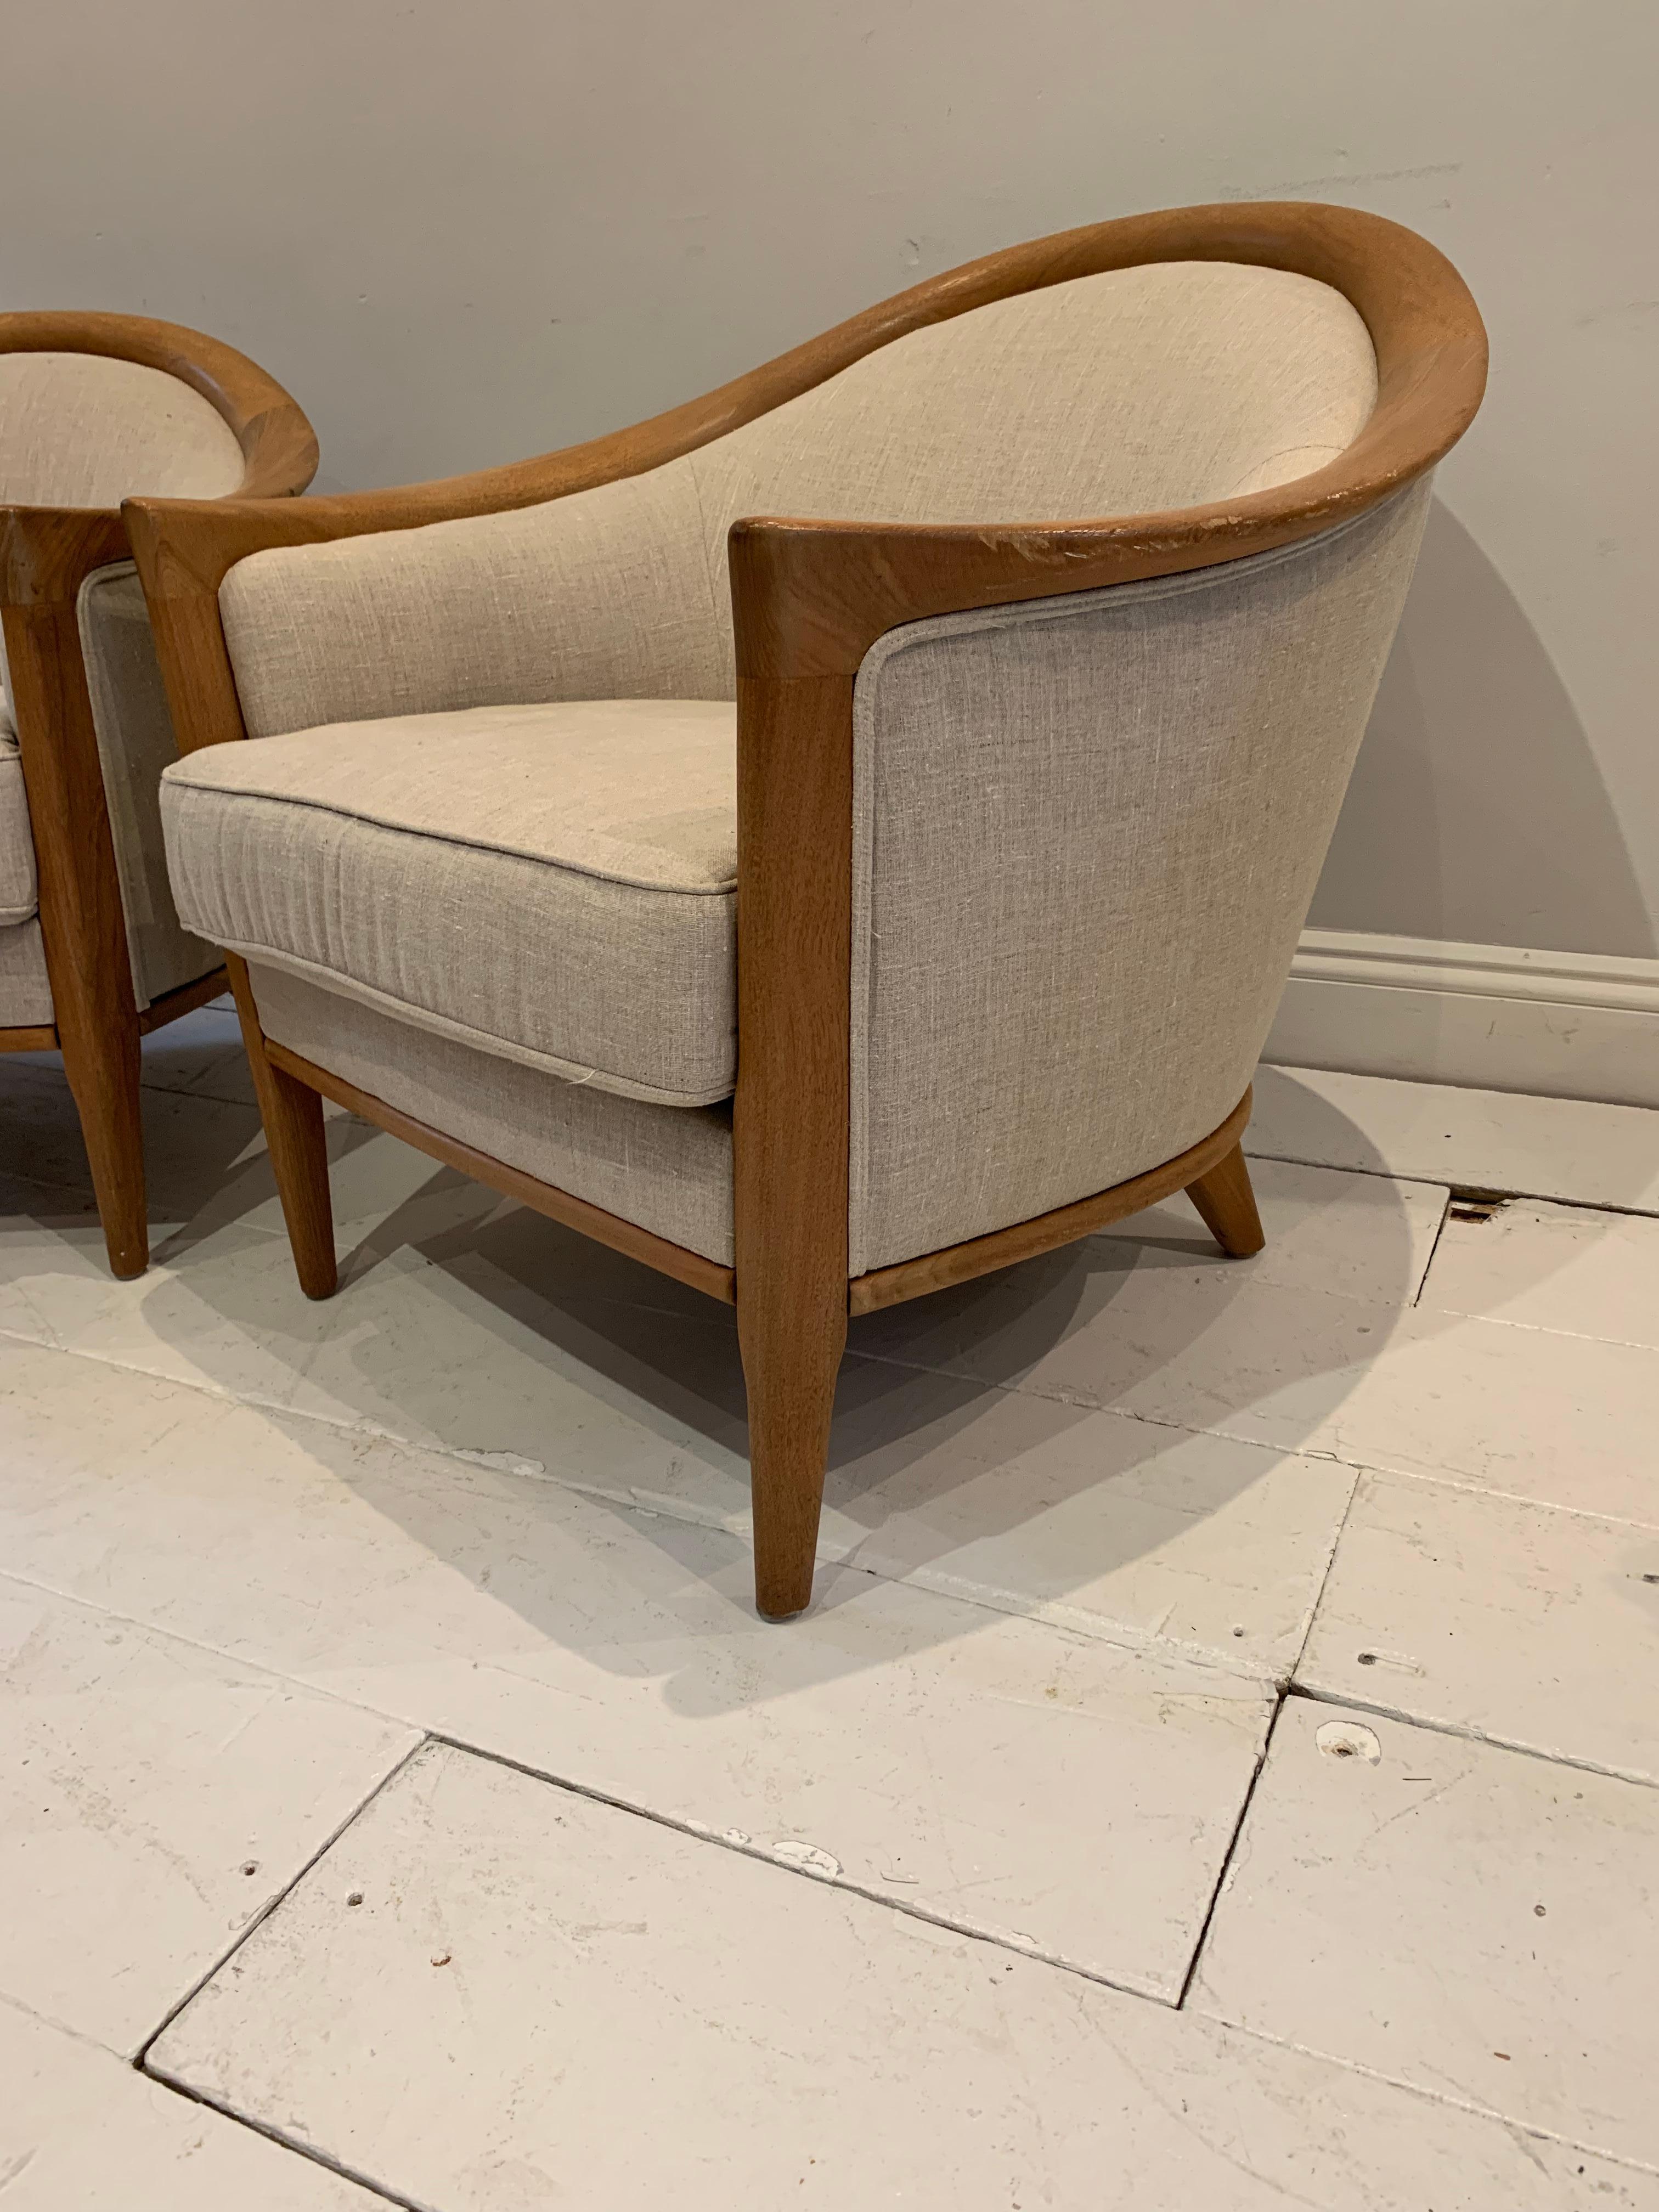 Pair of 1960s Swedish Oak Curved Armchairs Reupholstered in a Neutral Linen For Sale 6